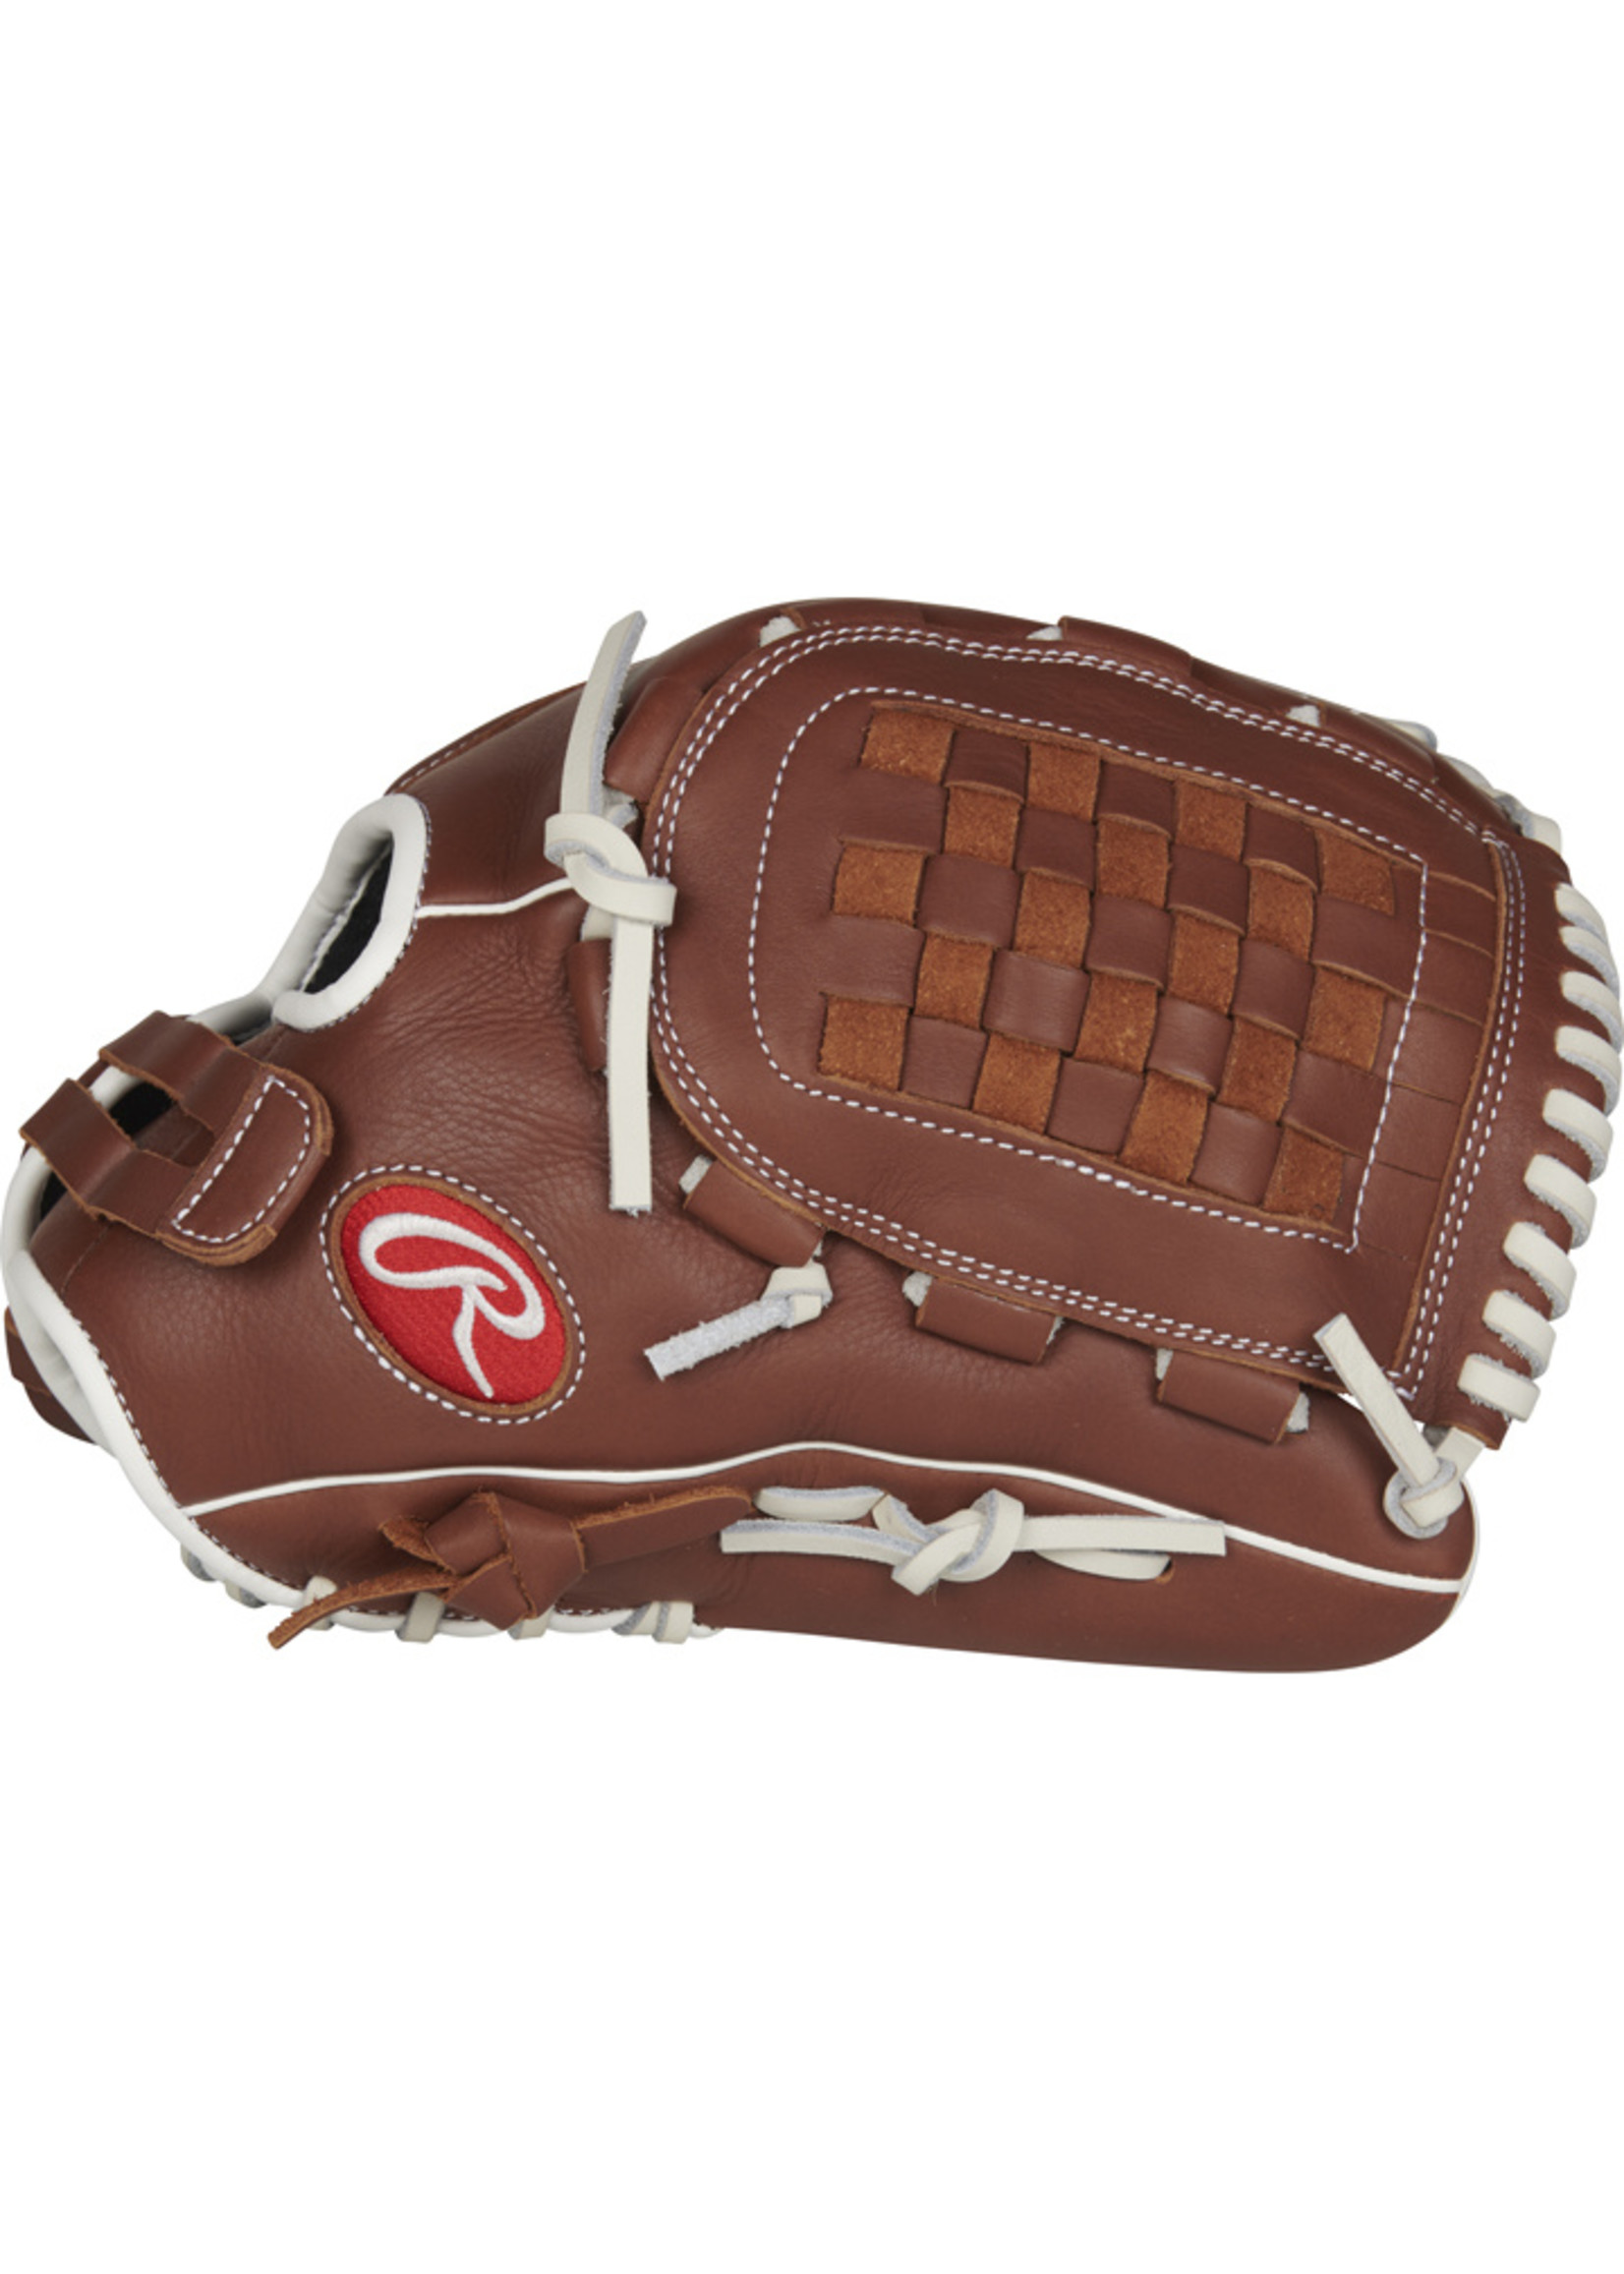 RAWLINGS R9 SOFTBALL 12.5" P/IF/OF, PULL STRP/DBL LACE BSK